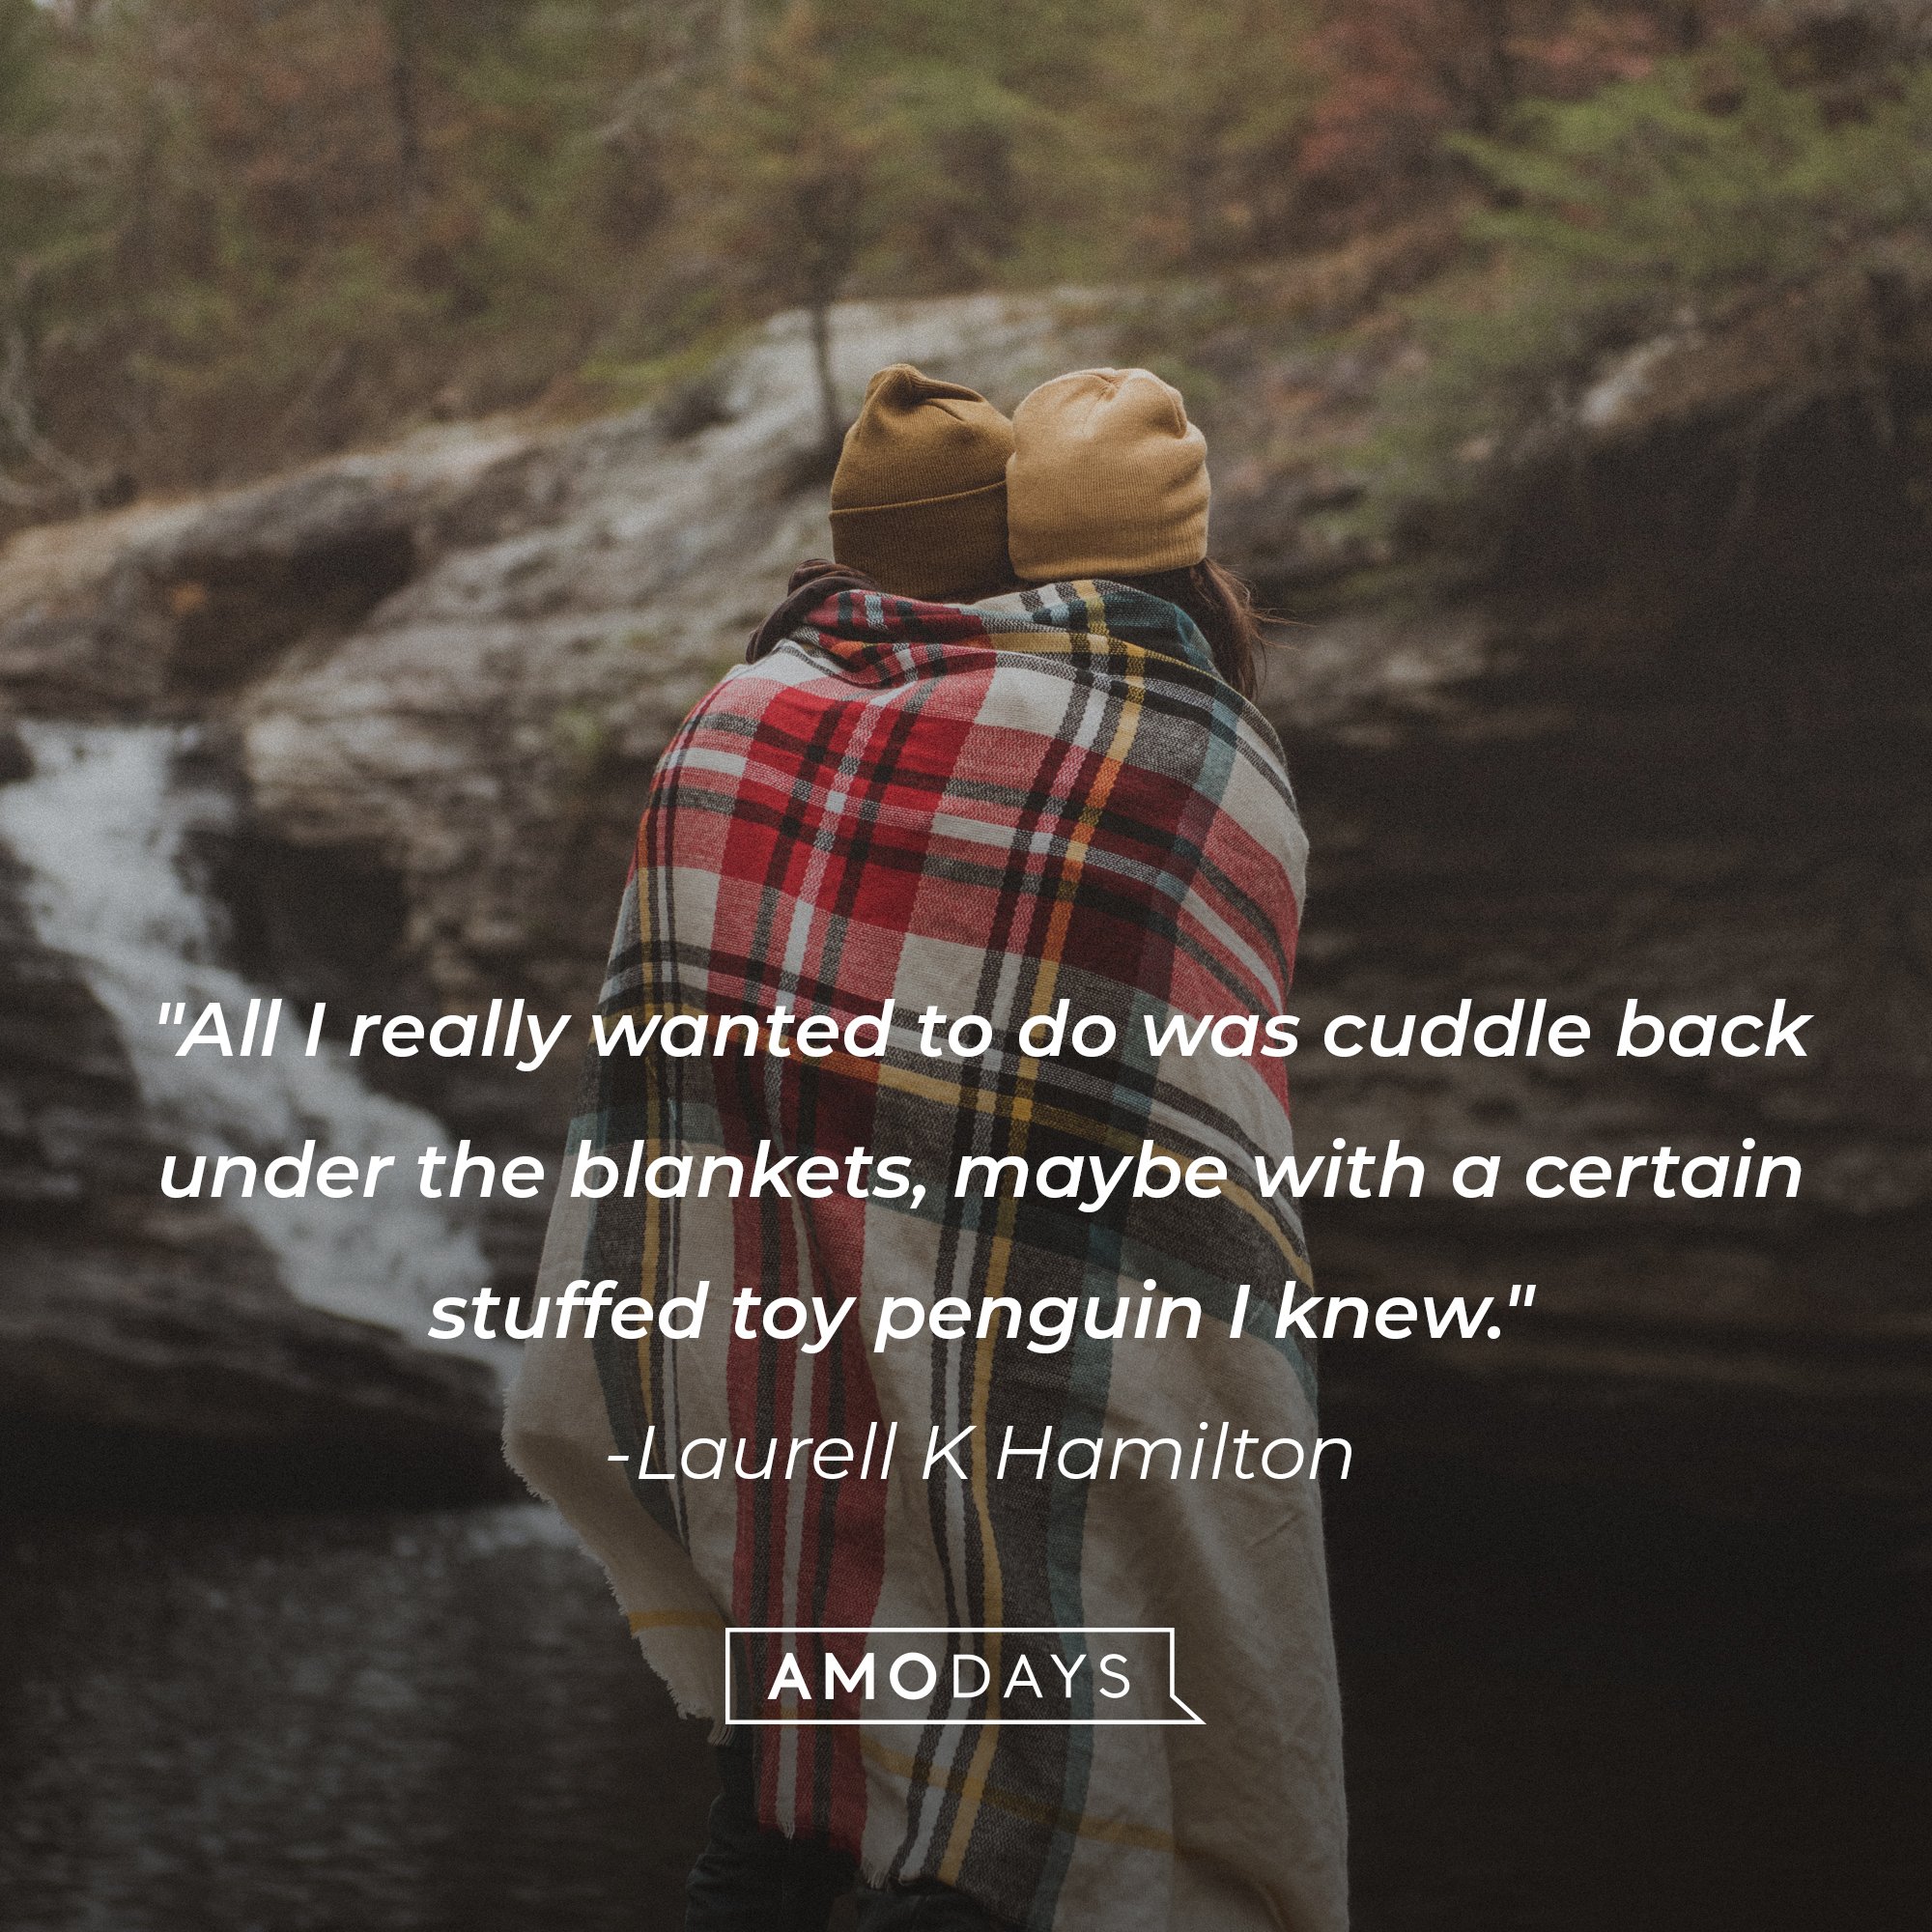 Laurell K Hamilton's quote: "All I really wanted to do was cuddle back under the blankets, maybe with a certain stuffed toy penguin I knew." | Image: AmoDays